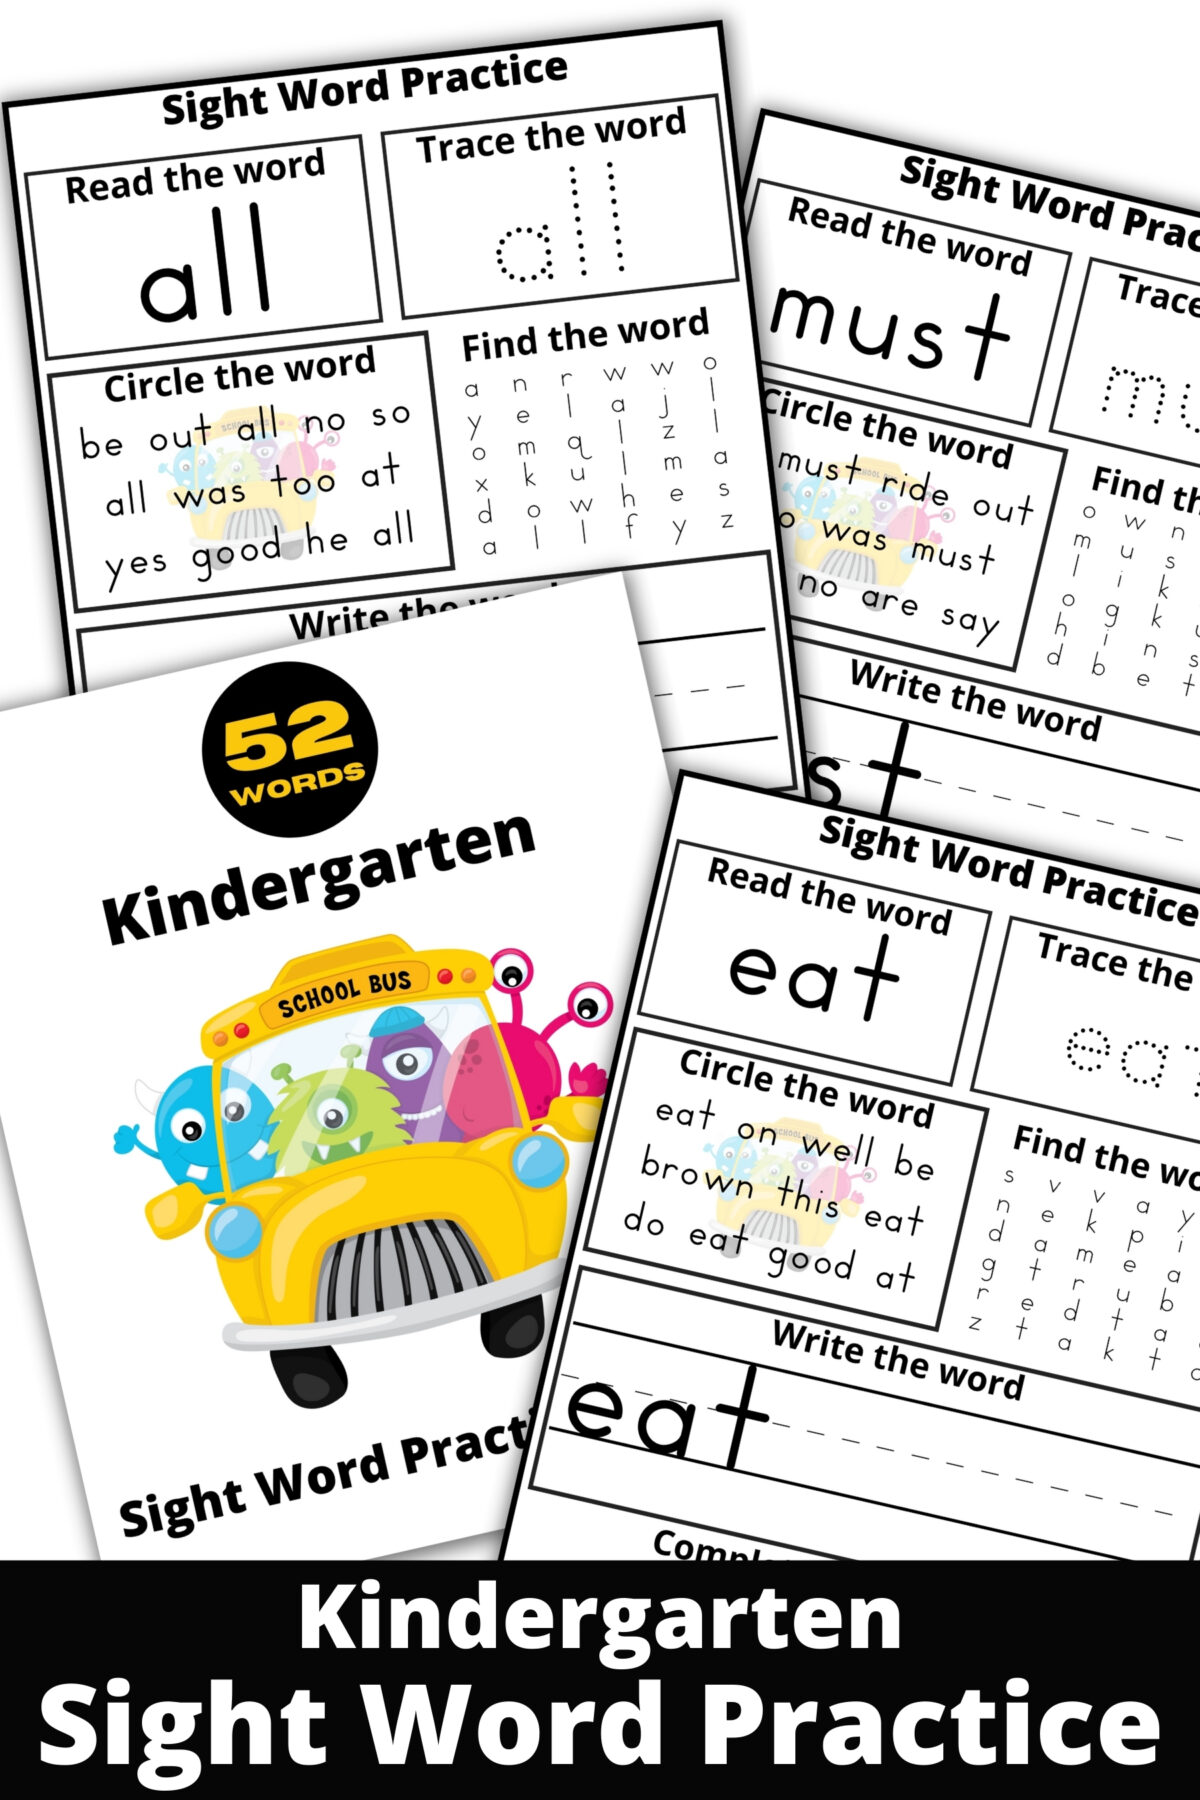 Free printable Kindergarten Sight Word Practice Sheets from the Dolch Sight Word List. Includes 52 Sheets for your child to learn from!